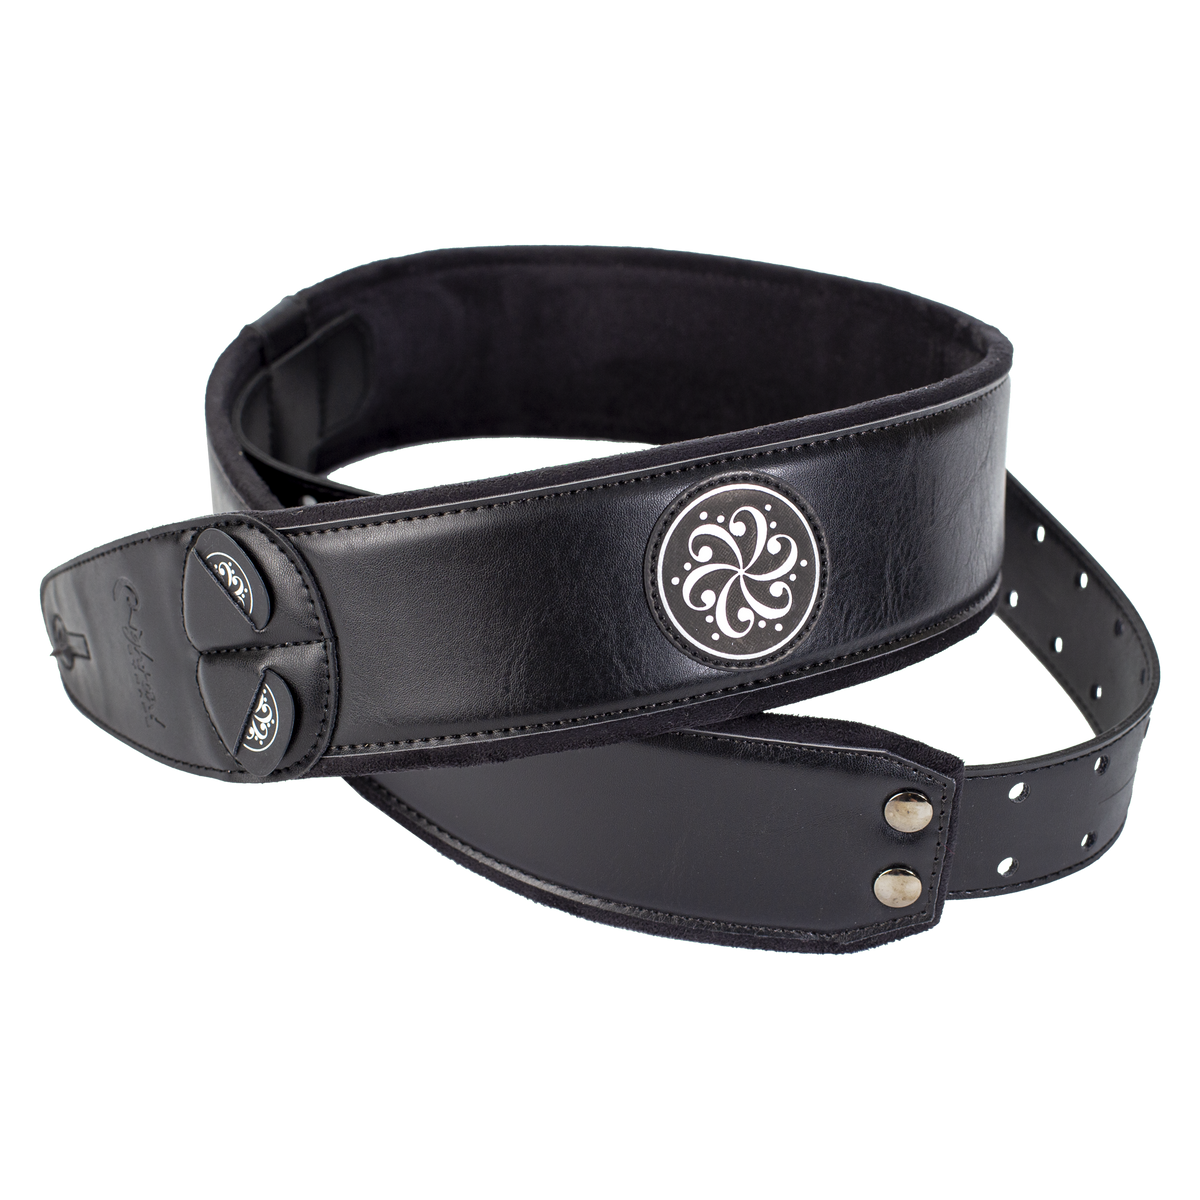 Vegan Strap by Right On!